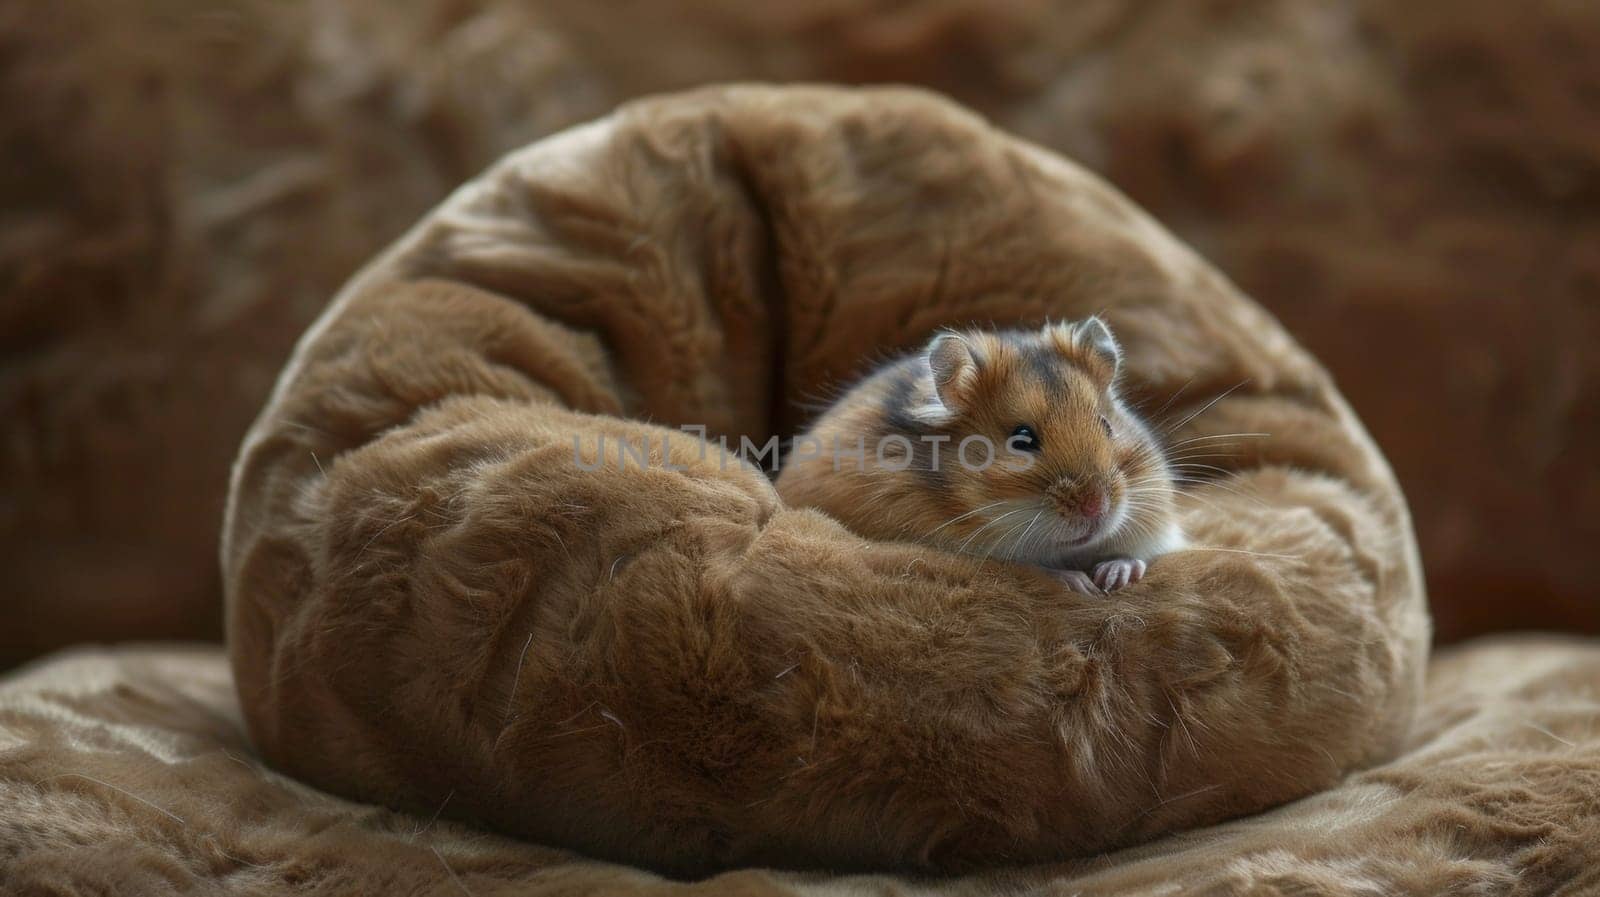 A small brown and white hamster sitting in a furry bean bag